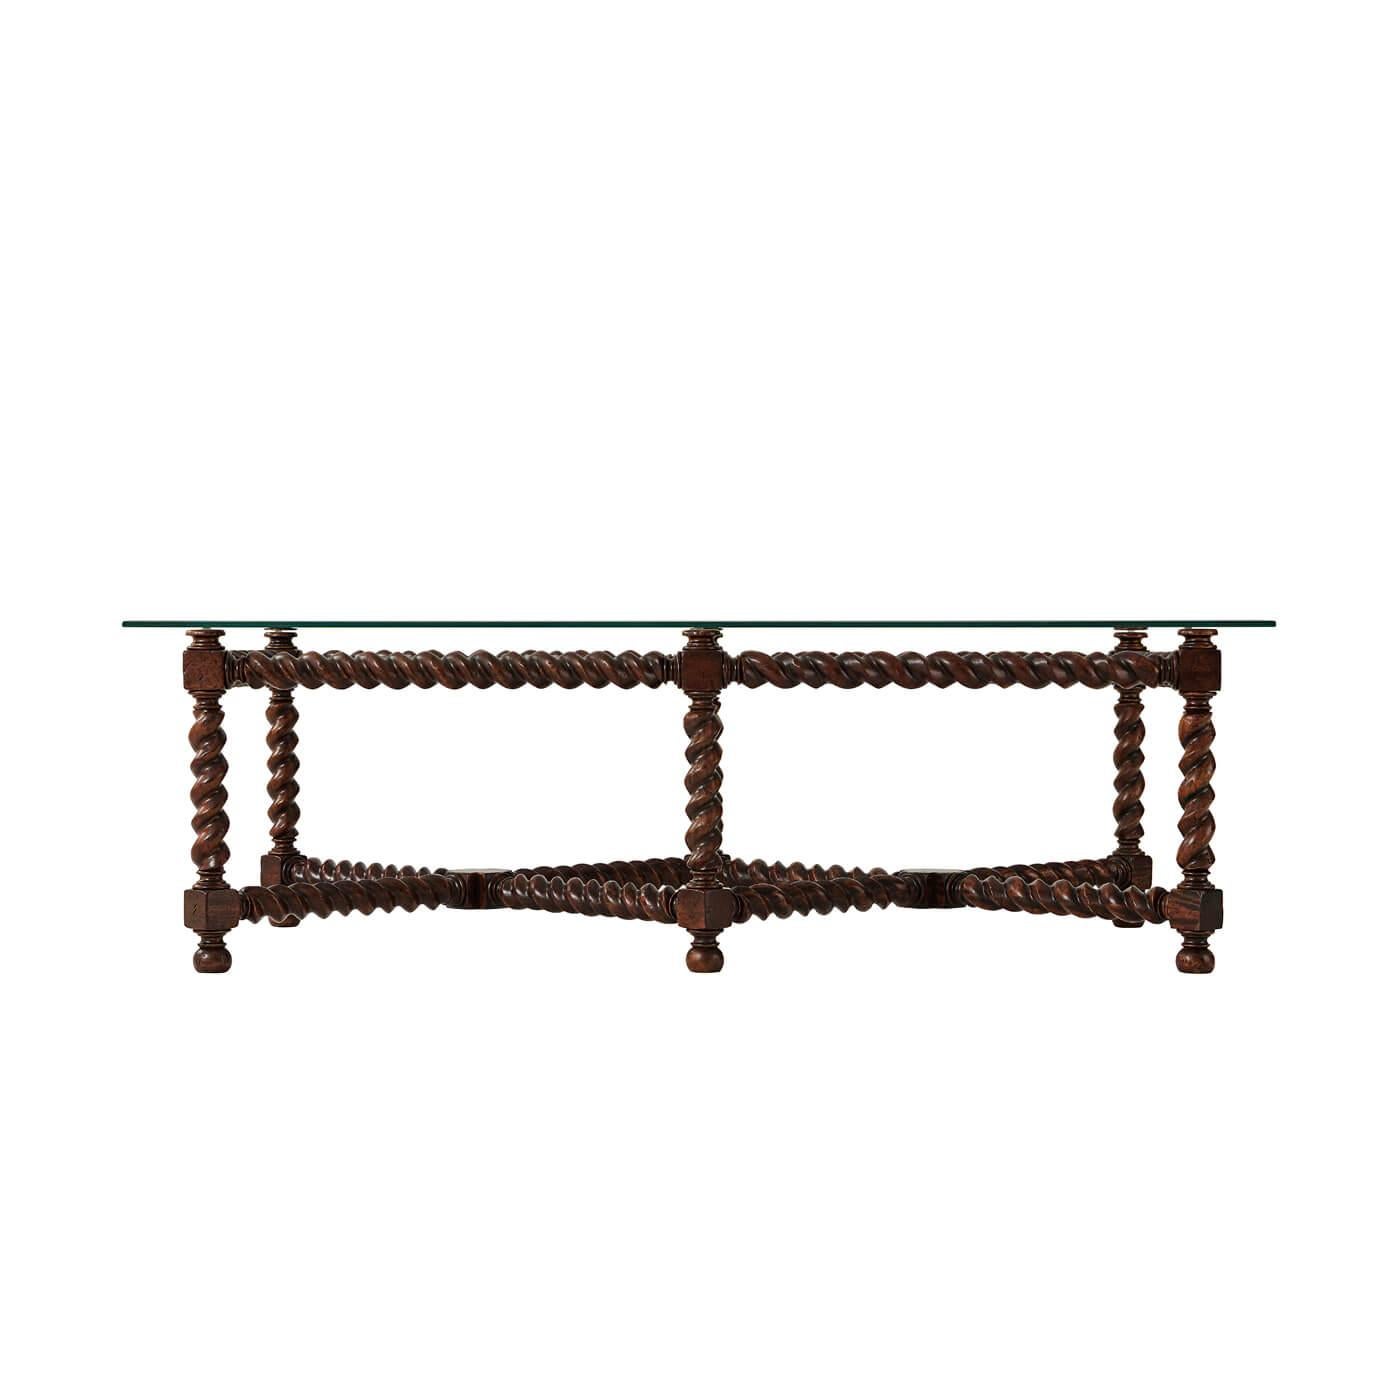 A rustic Jacobean-style spiral leg coffee table with a glass top. This rectangular coffee table has six oak barley twist carved legs with an 